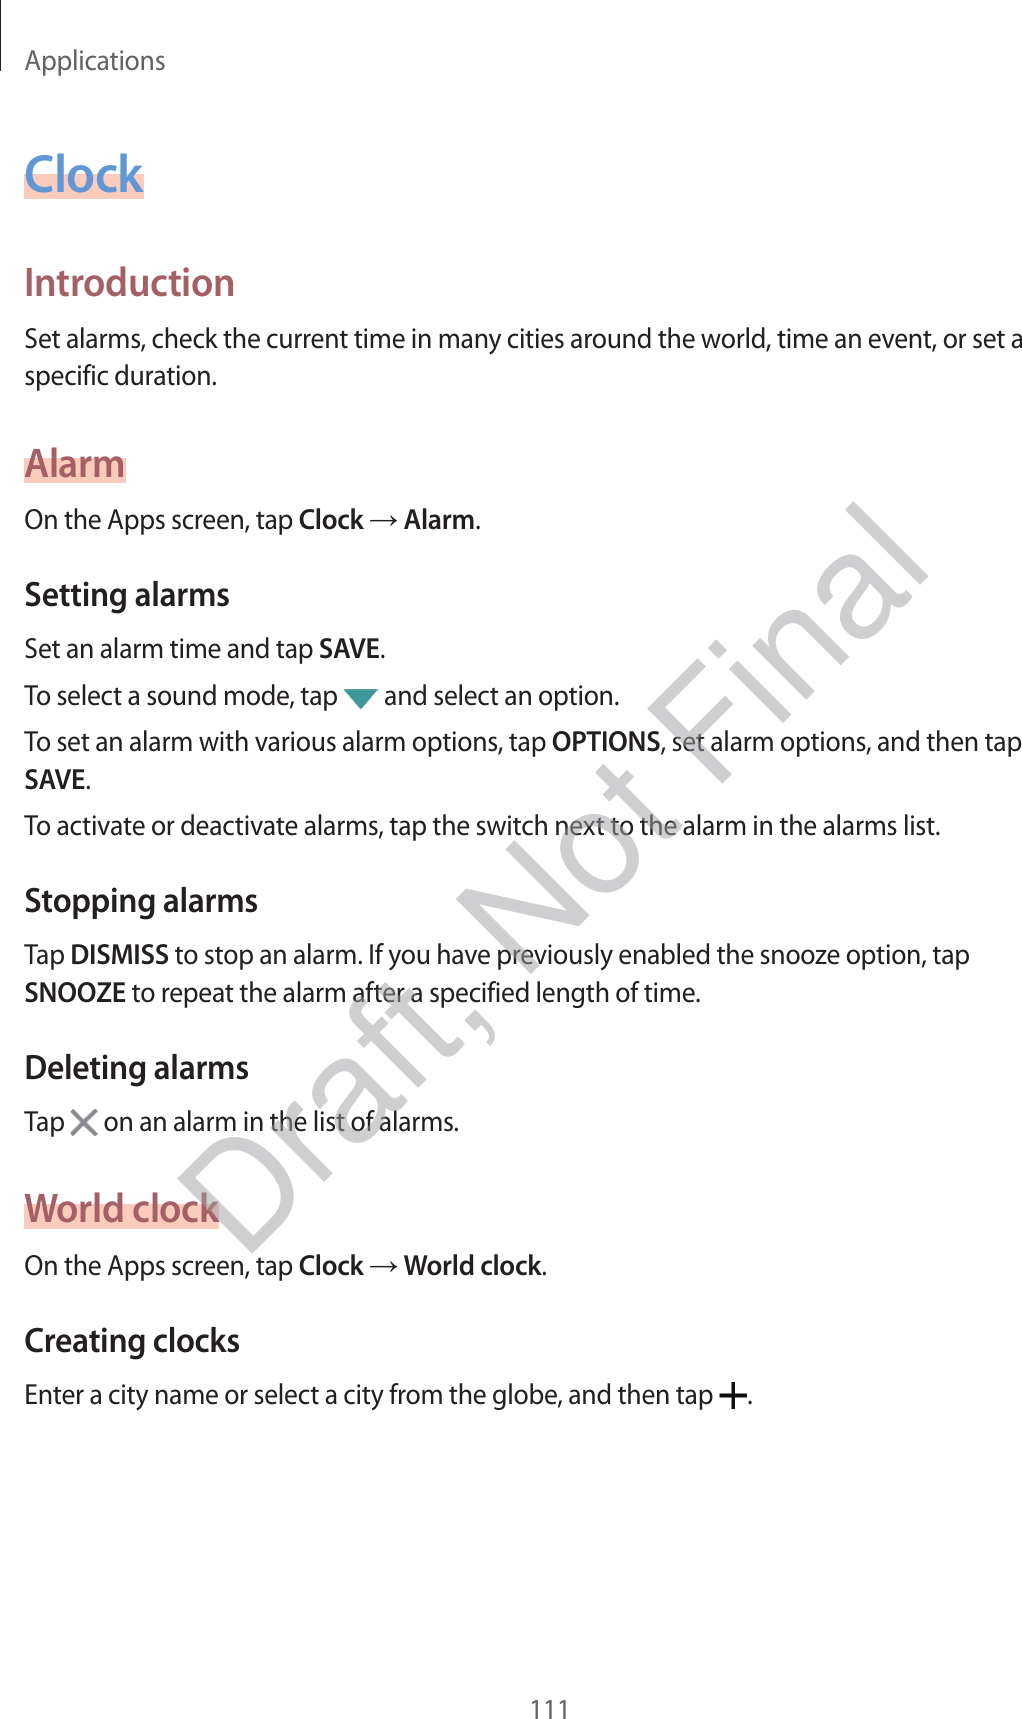 Applications111ClockIntroductionSet alarms, check the current time in many cities around the world, time an event, or set a specific duration.AlarmOn the Apps screen, tap Clock  Alarm.Setting alarmsSet an alarm time and tap SAVE.To select a sound mode, tap   and select an option.To set an alarm with various alarm options, tap OPTIONS, set alarm options, and then tap SAVE.To activate or deactivate alarms, tap the switch next to the alarm in the alarms list.Stopping alarmsTap DISMISS to stop an alarm. If you have previously enabled the snooze option, tap SNOOZE to repeat the alarm after a specified length of time.Deleting alarmsTap   on an alarm in the list of alarms.World clockOn the Apps screen, tap Clock  World clock.Creating clocksEnter a city name or select a city from the globe, and then tap  .Draft, Not Final